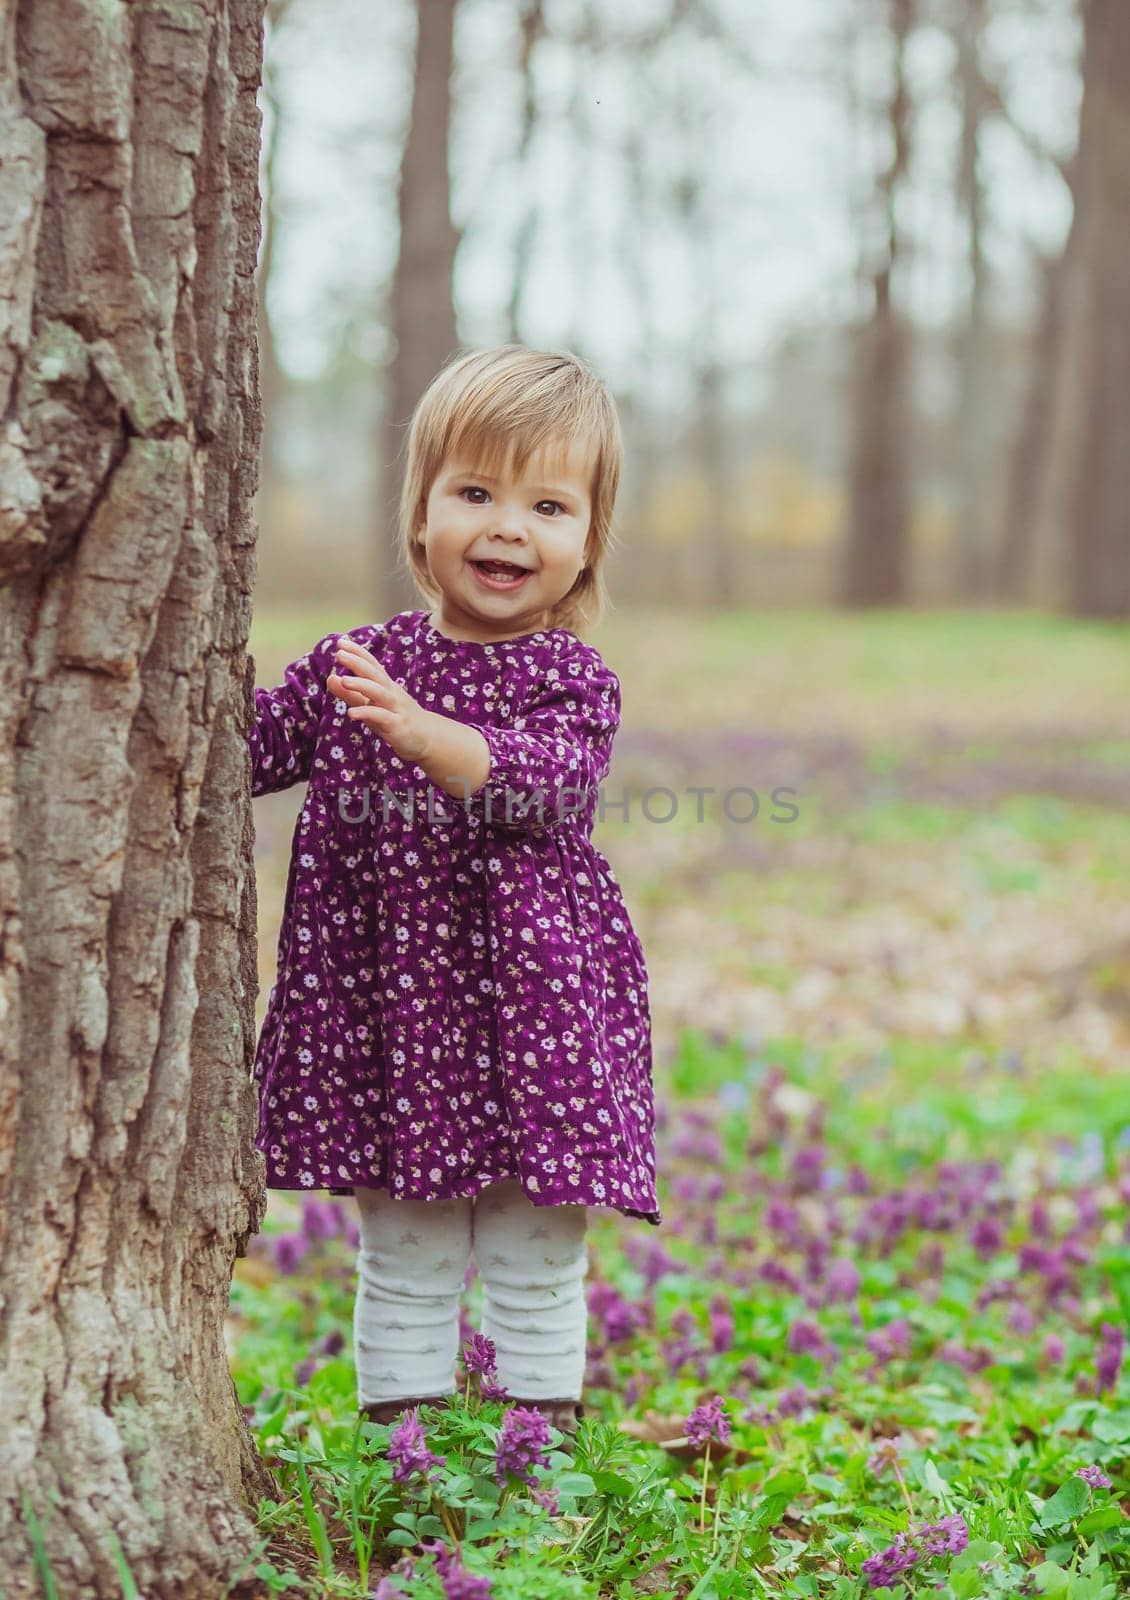 blond baby in a colored dress running in a forest glade with flowers.